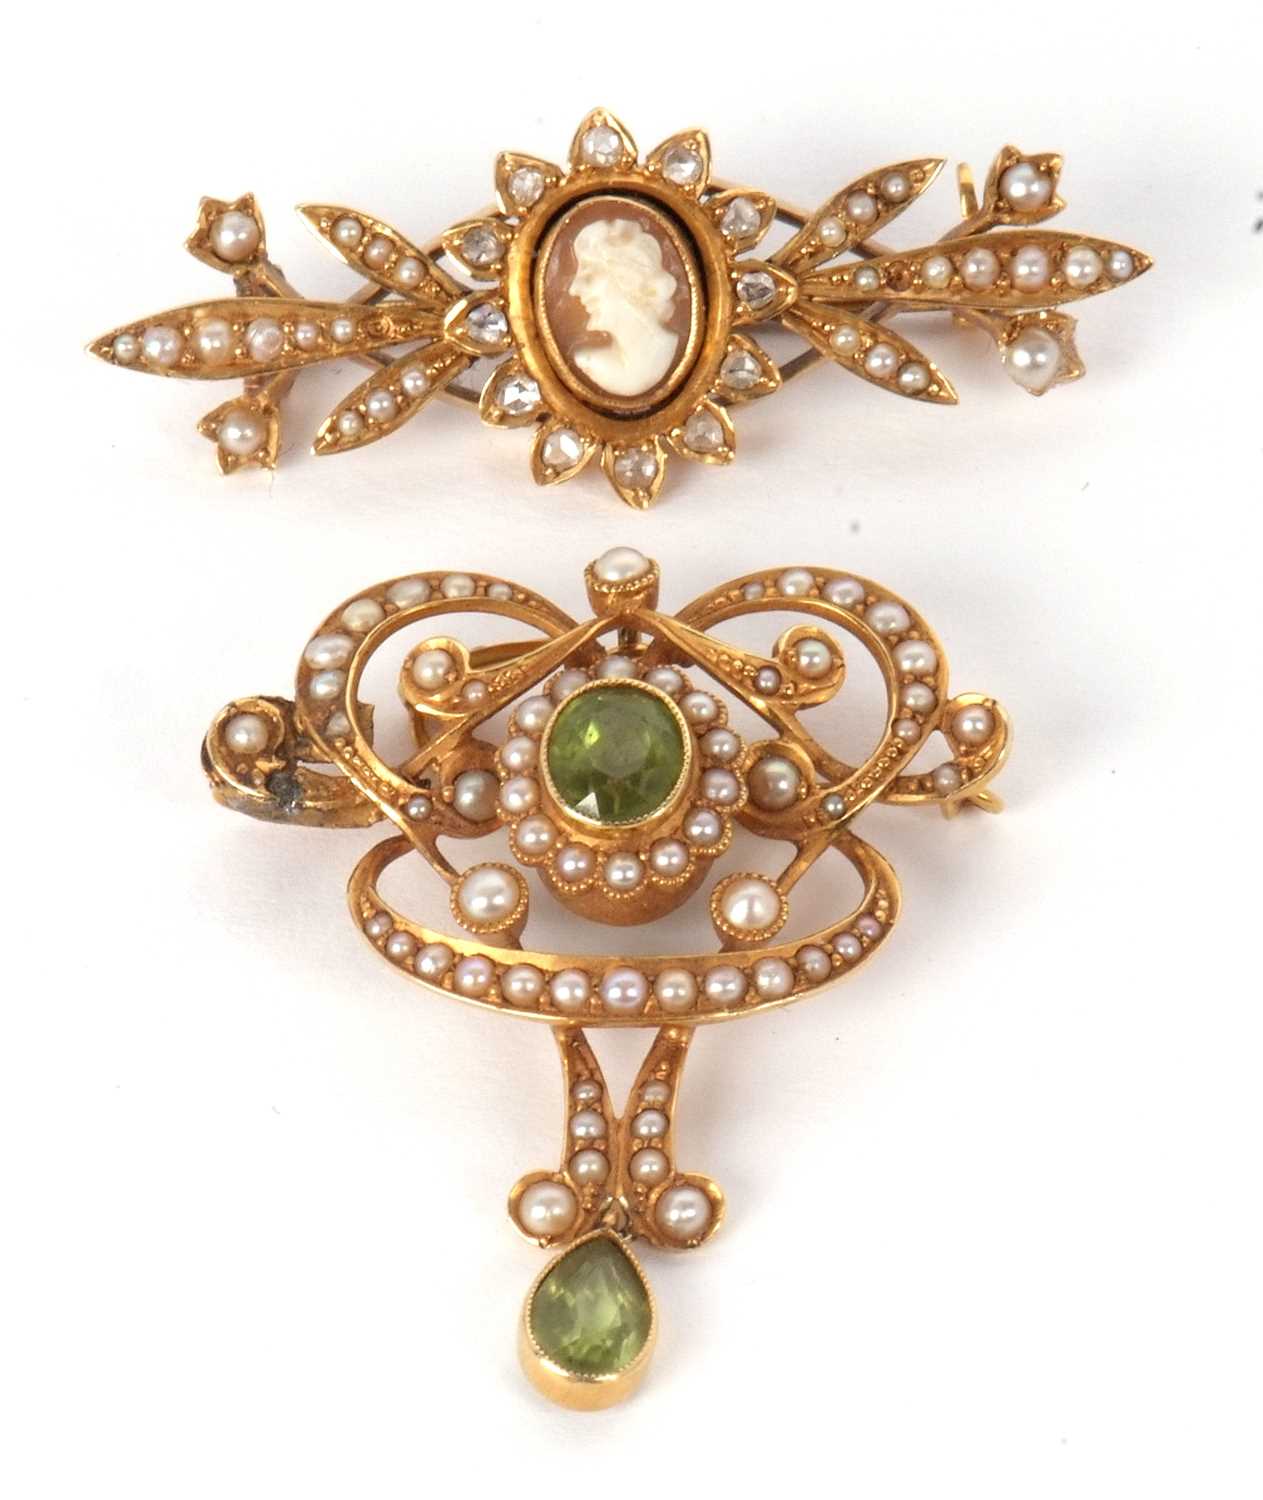 Two gemset brooches, the first an Art Nouveau peridot and seed pearl brooch/pendant, 32mm wide,